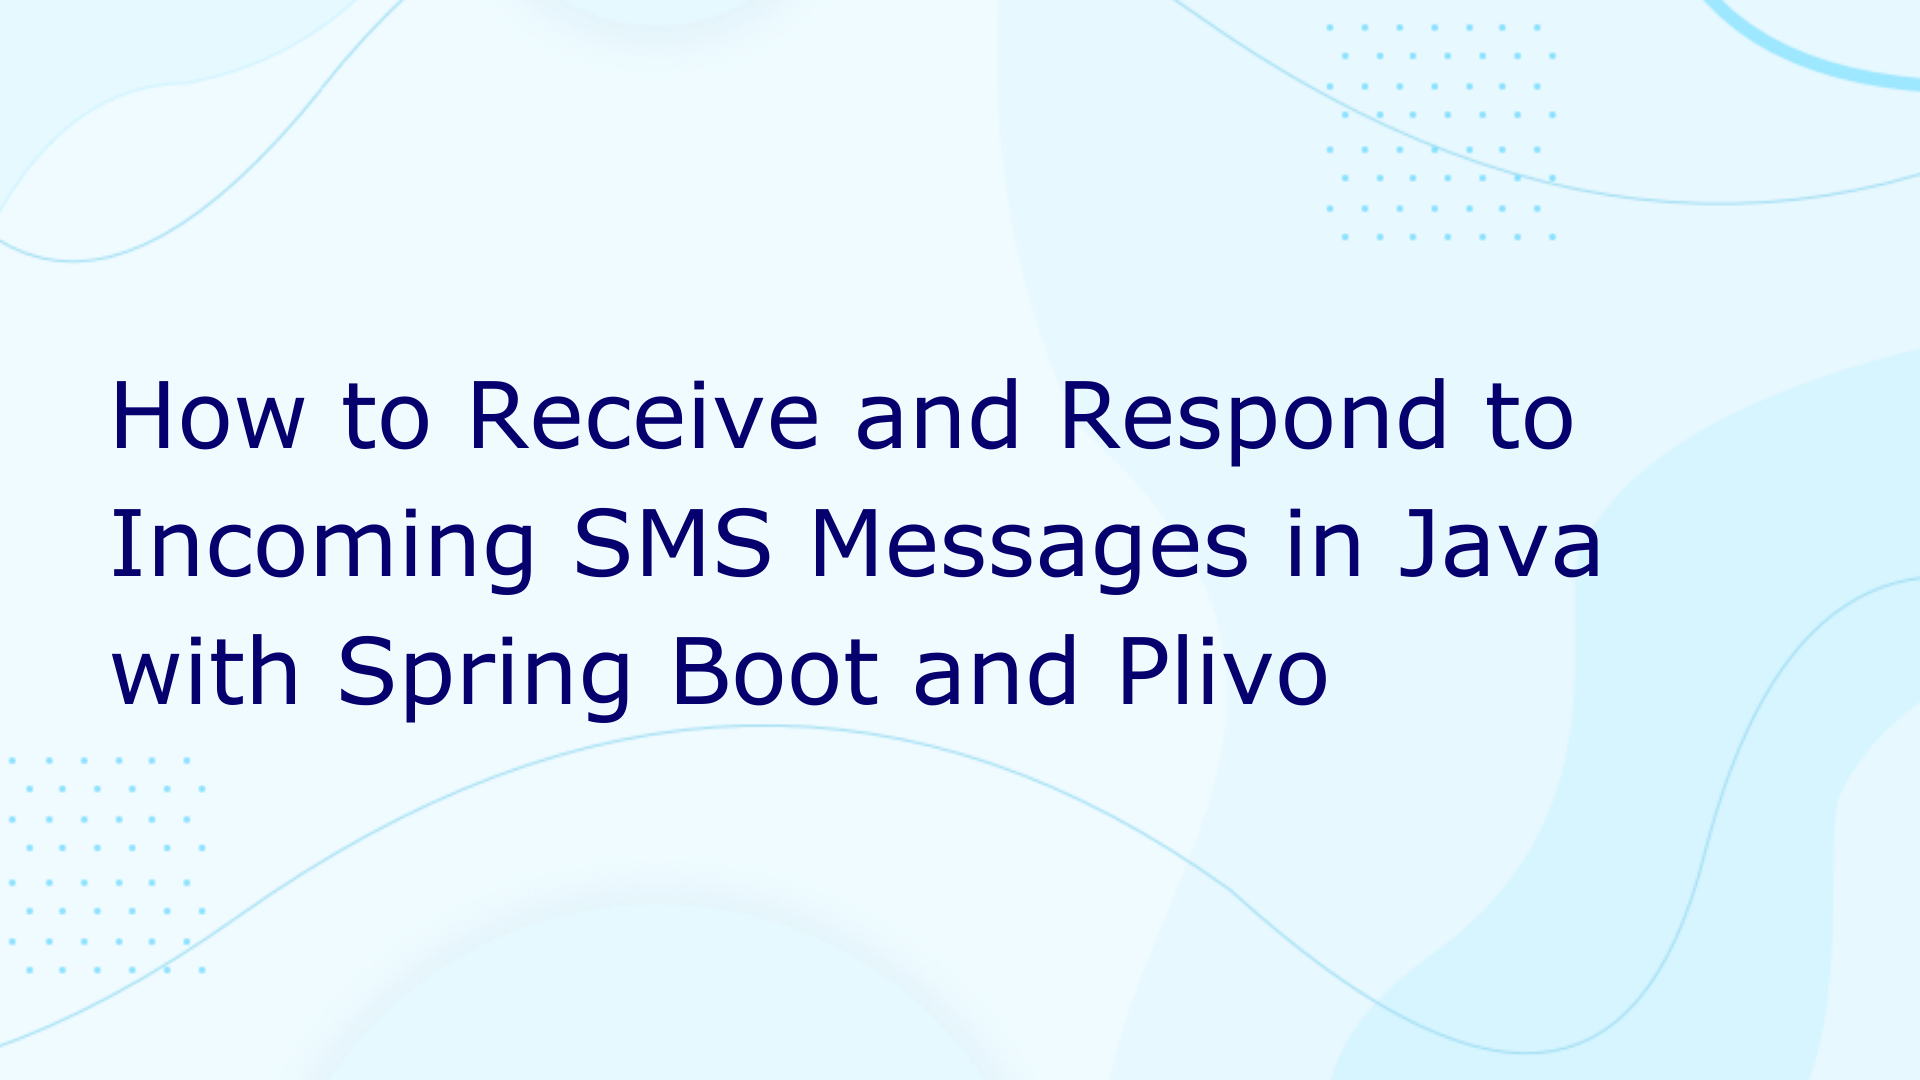 How to Receive and Respond to Incoming SMS Messages in Java with Spring Boot and Plivo